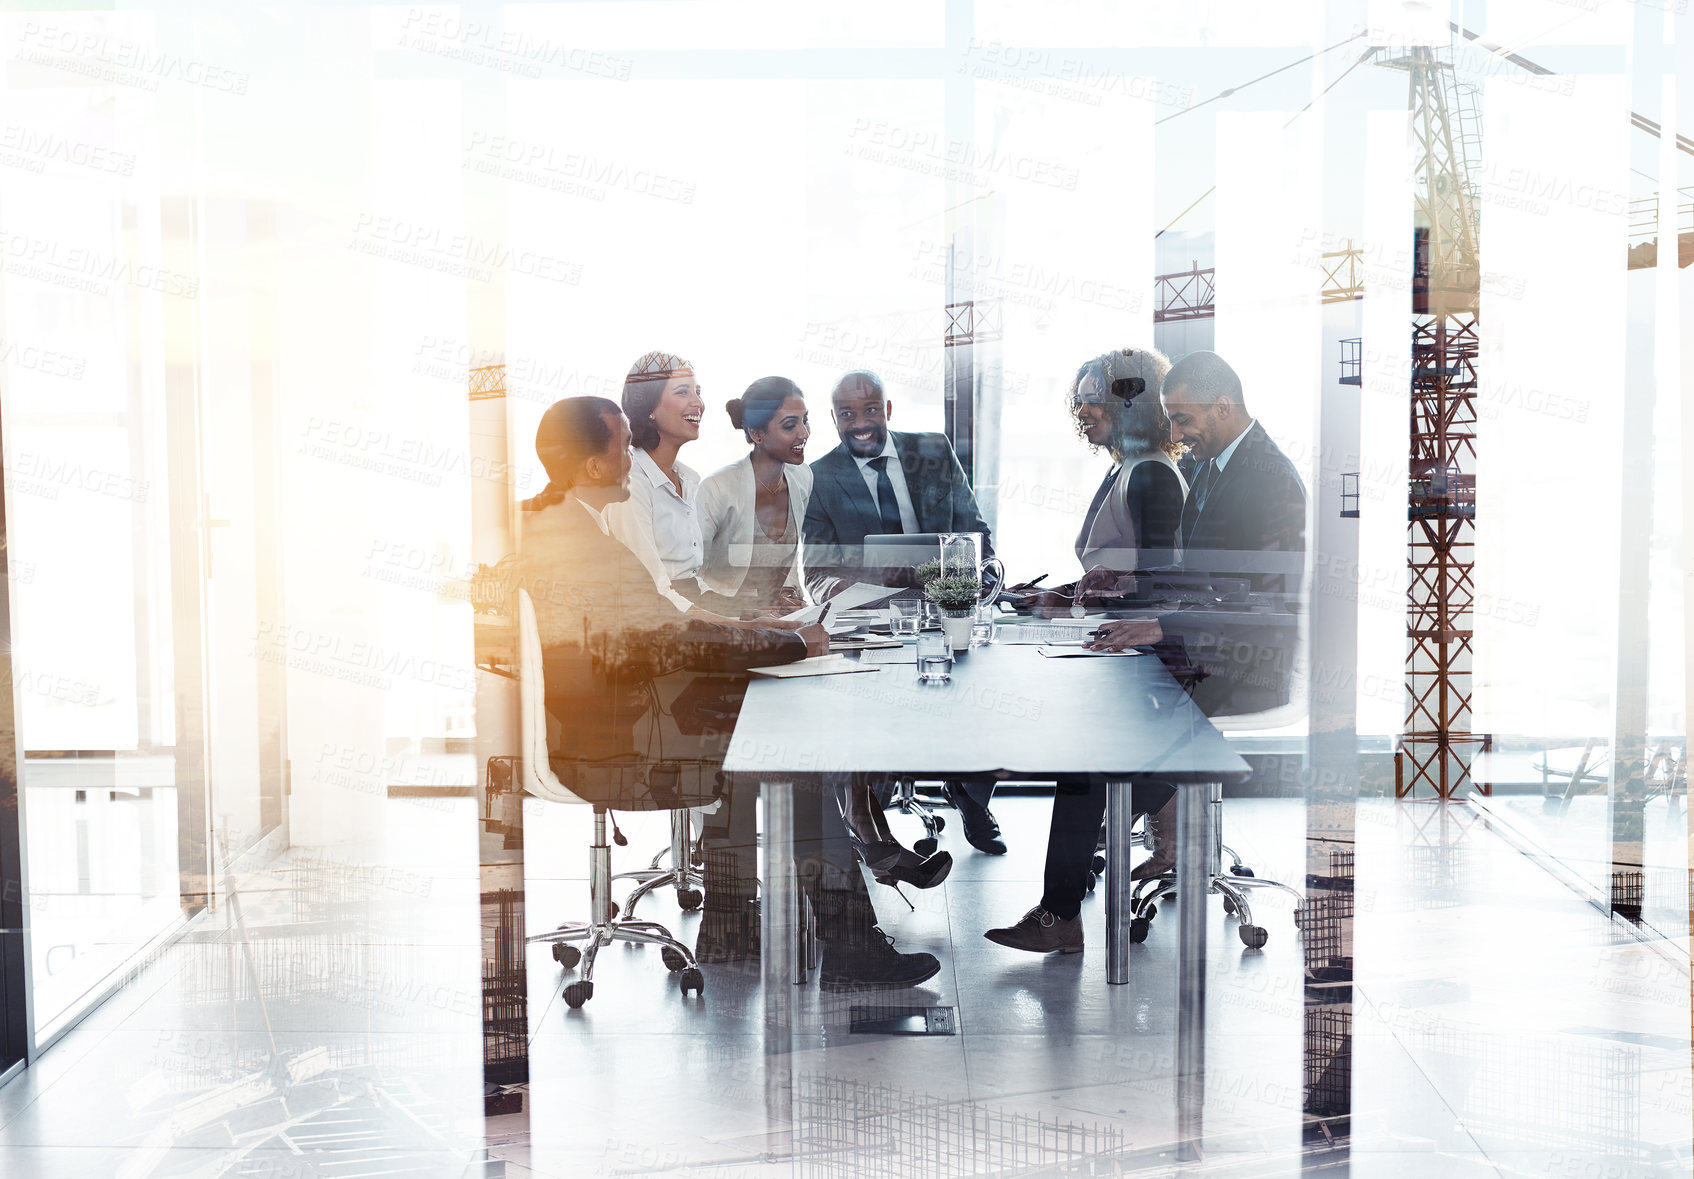 Buy stock photo Shot of a team of businesspeople in a meeting superimposed over a build site